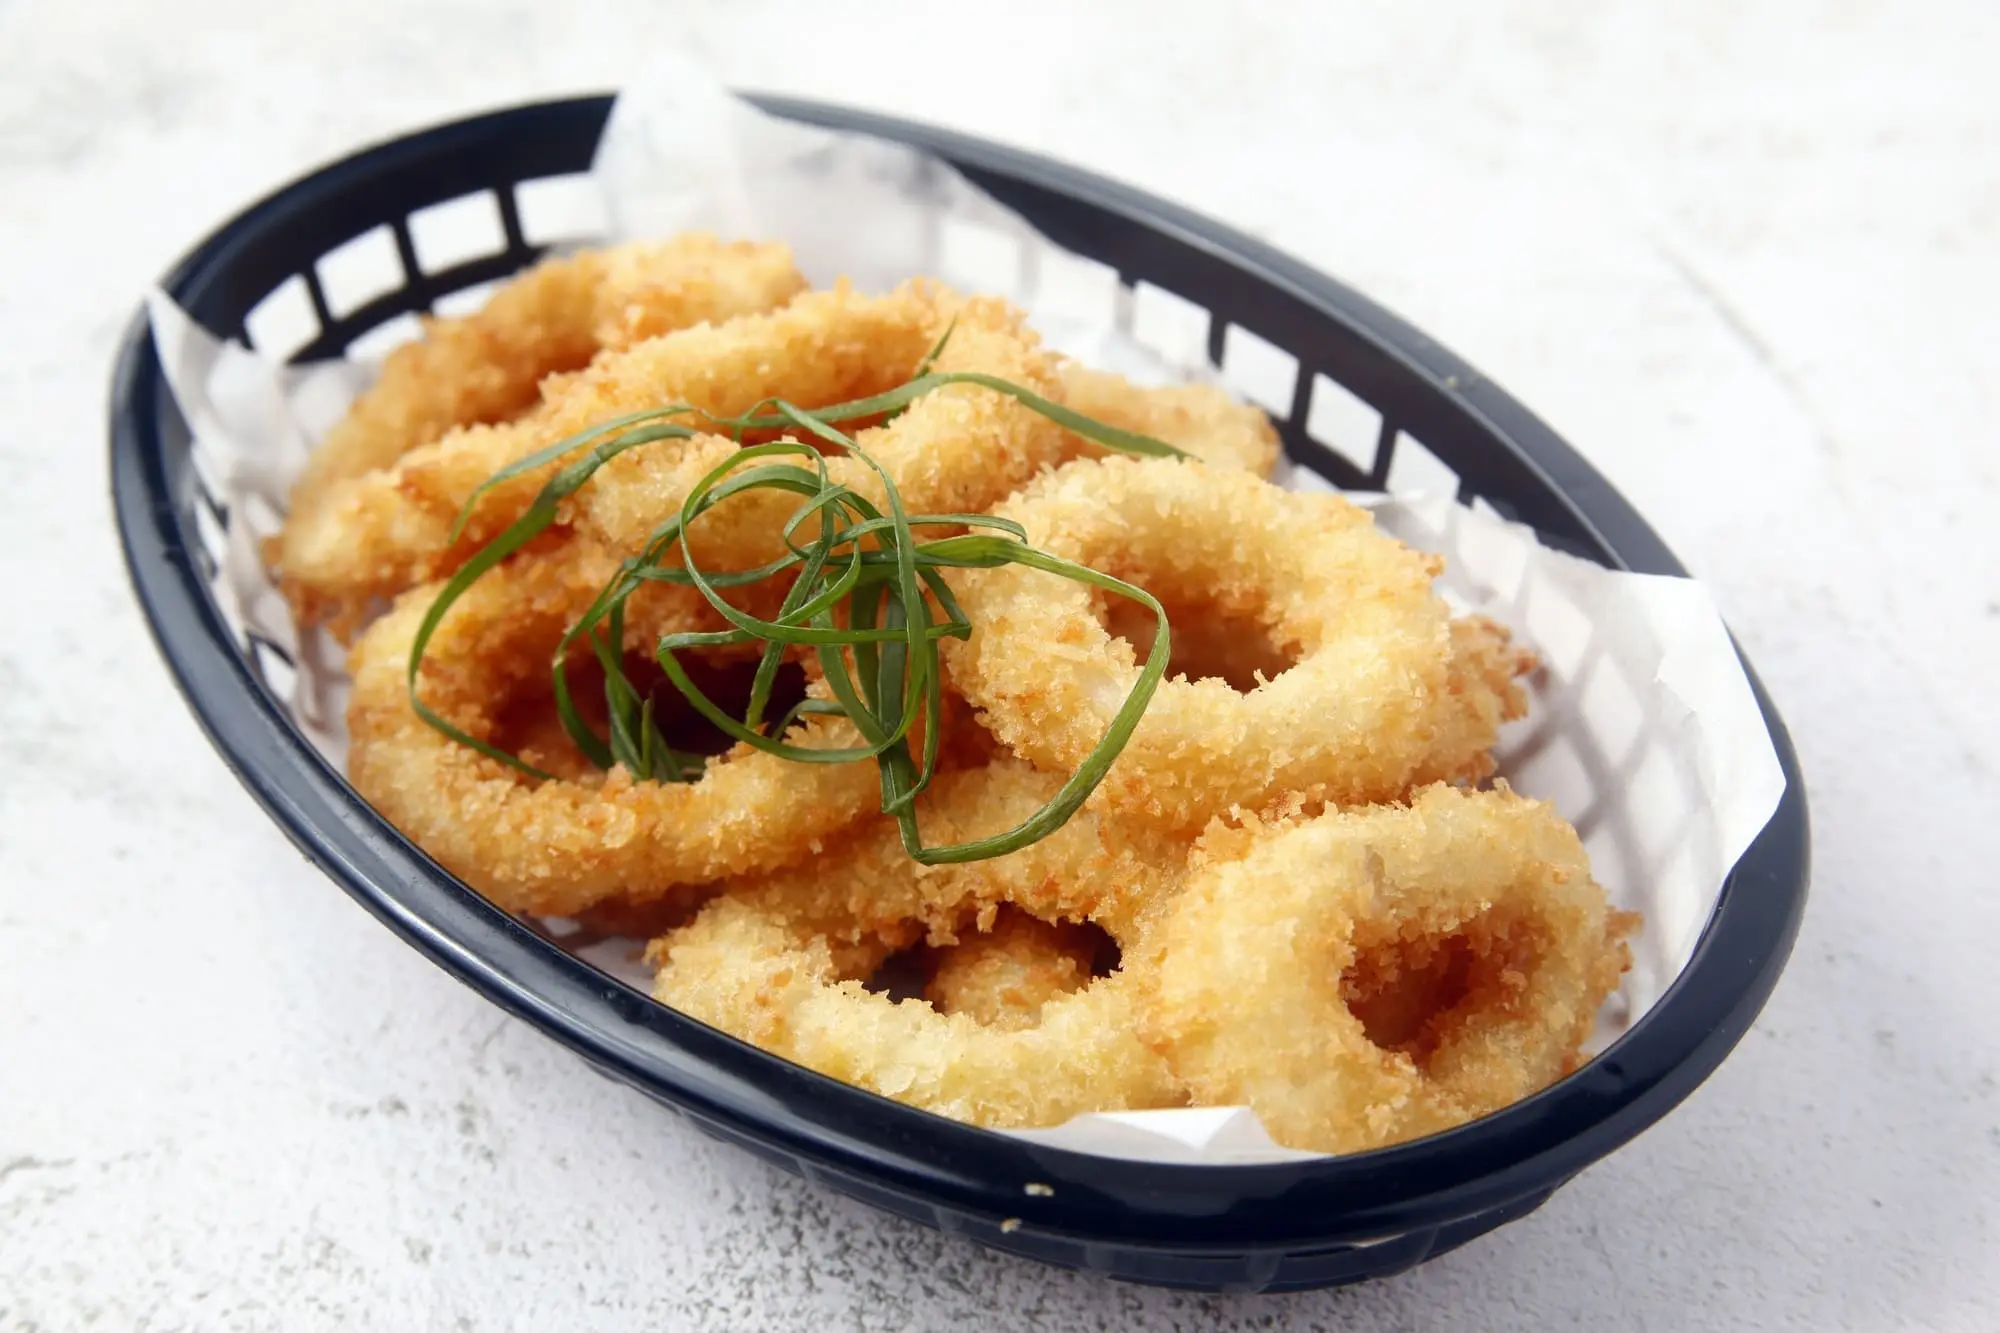 Freshly cooked calamares